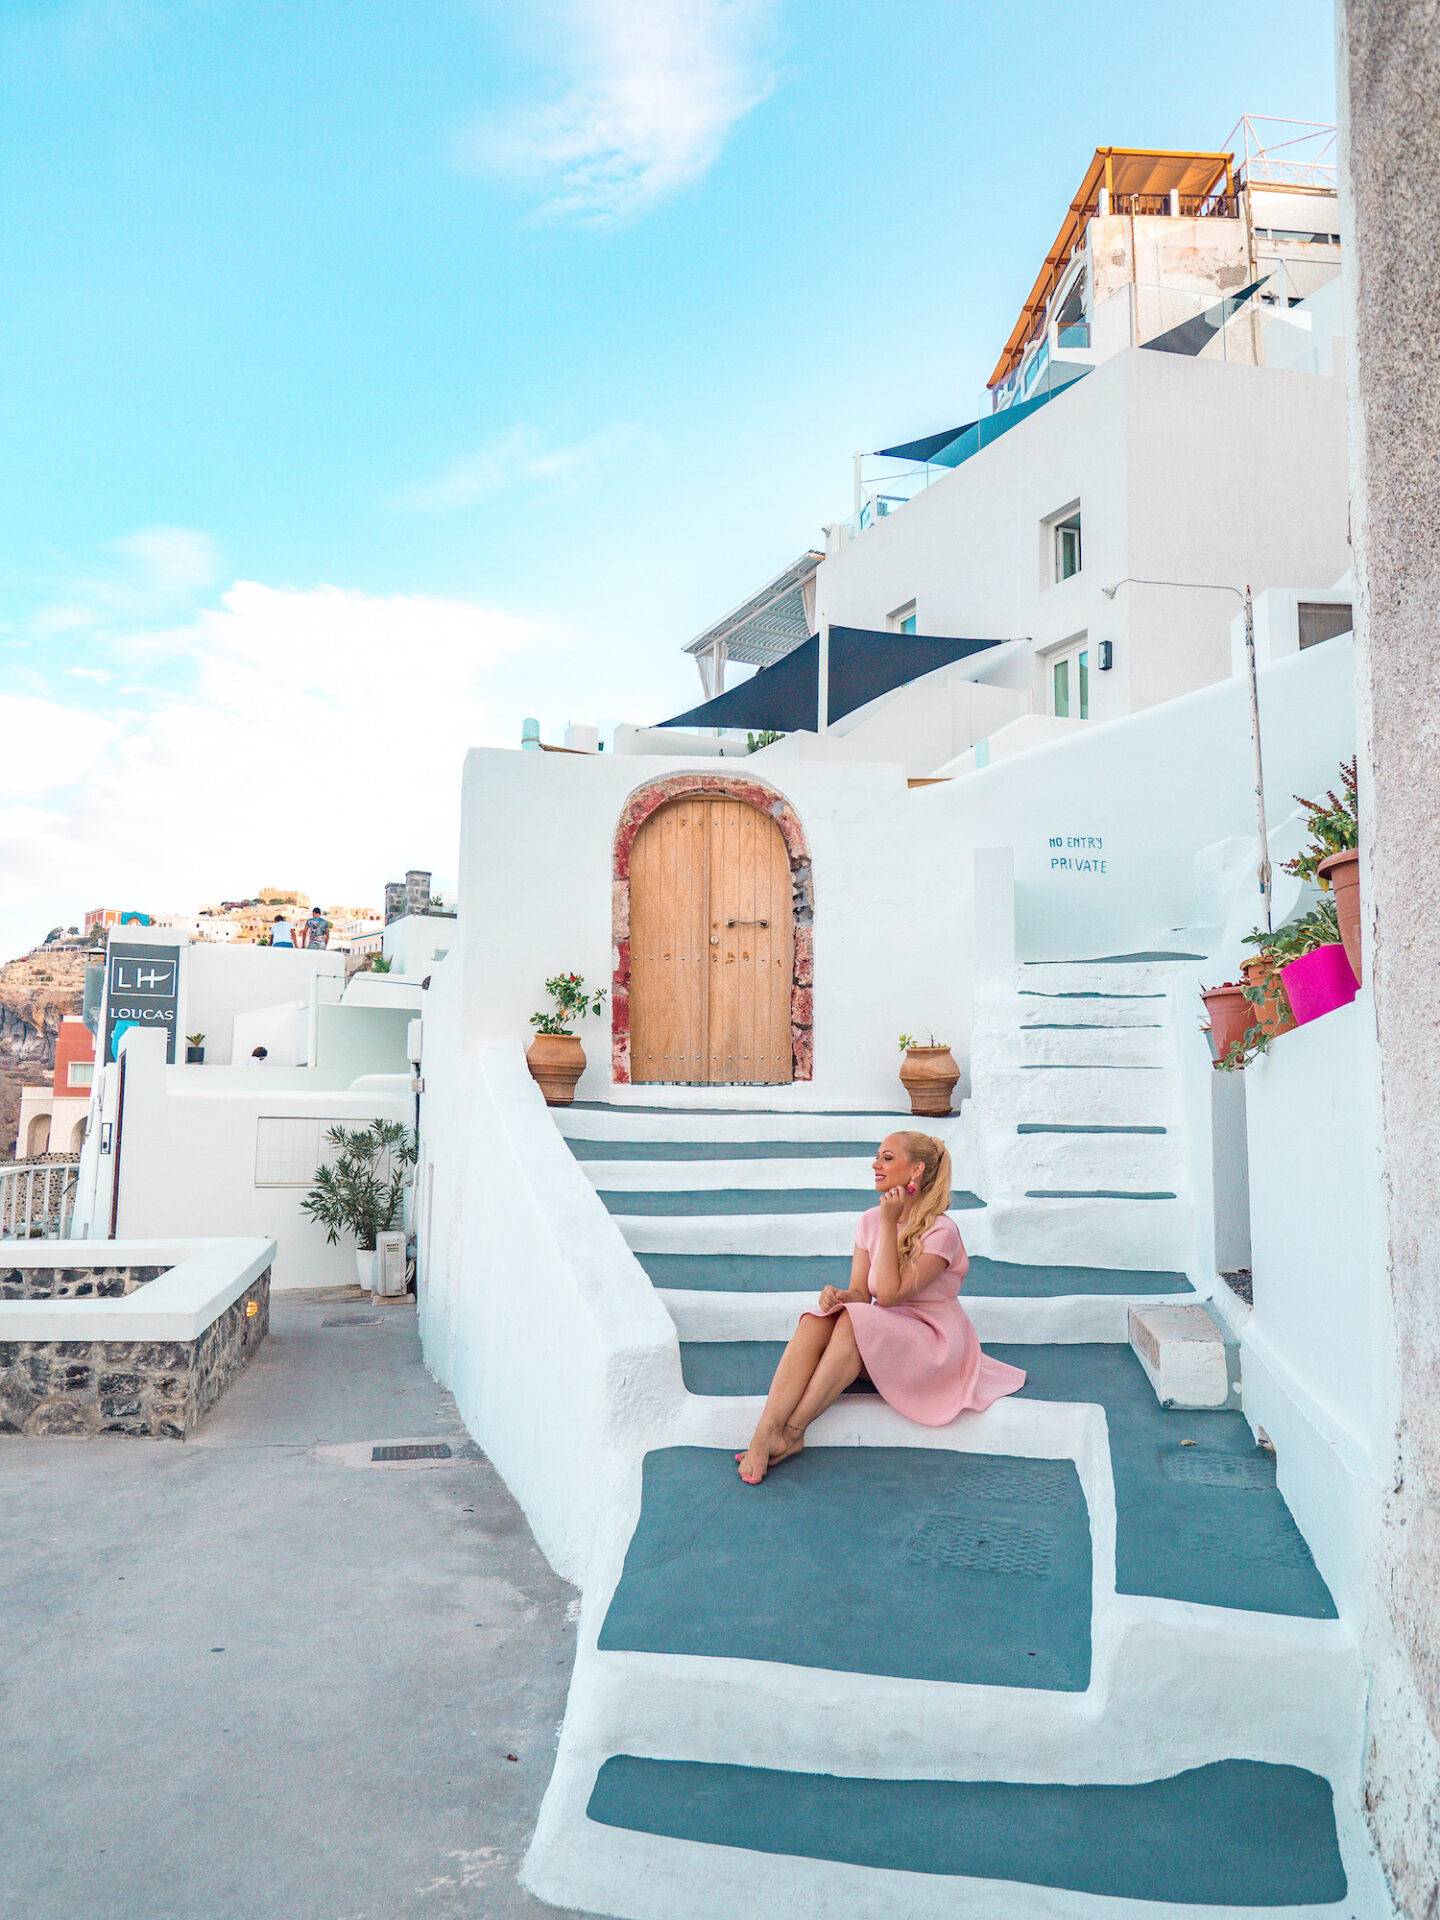 The best photo spots and most instagrammable places in Santorini: Colourful steps in Fira. Click the photo to see the rest of my list of the best instagram photo spots in Santorini!